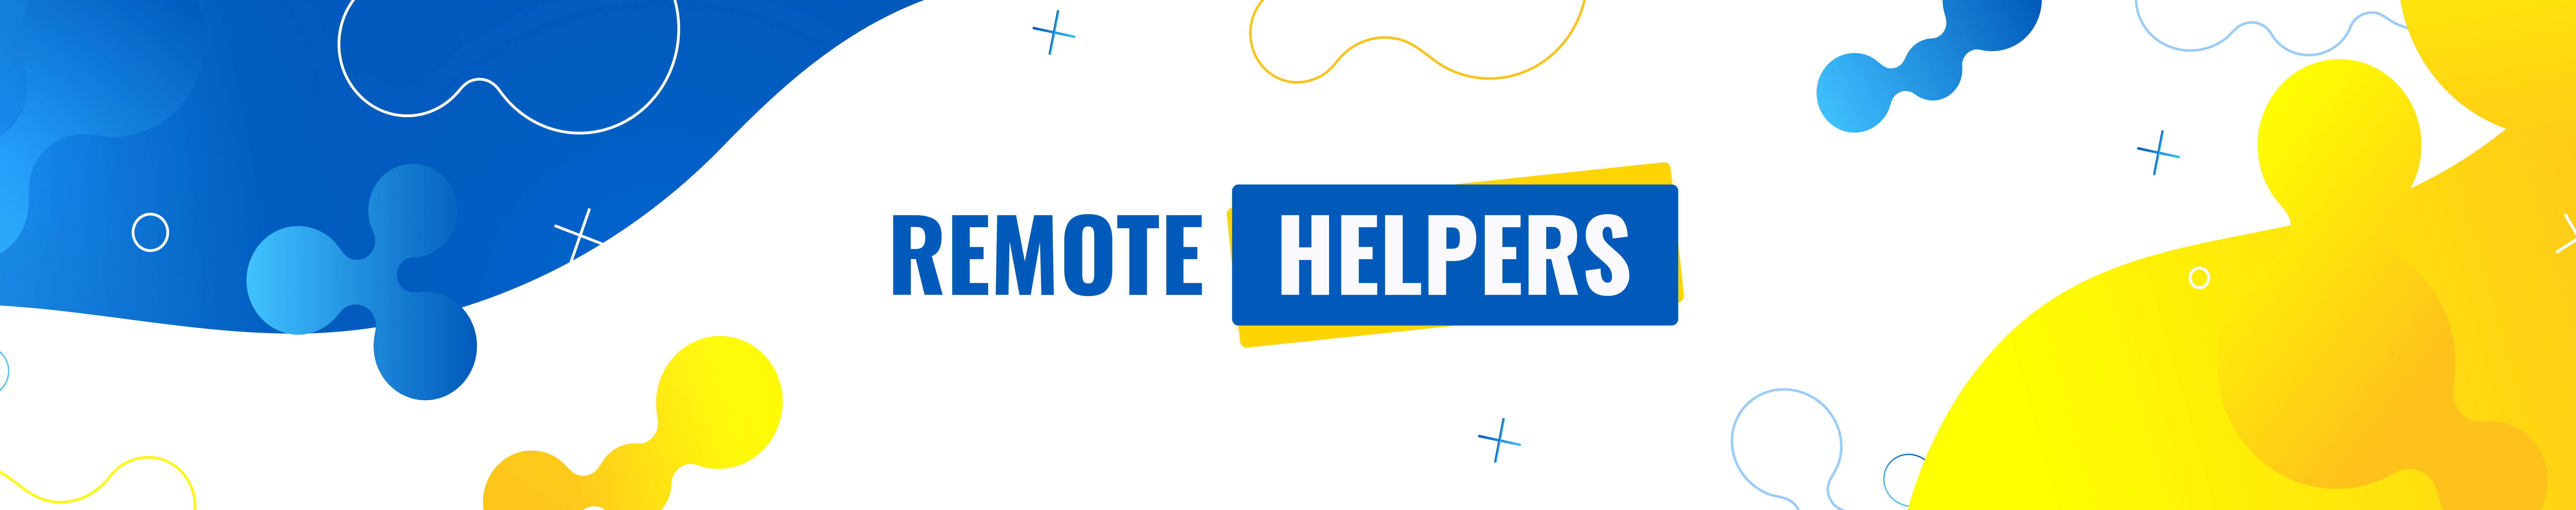 Remote Helpers's profile banner